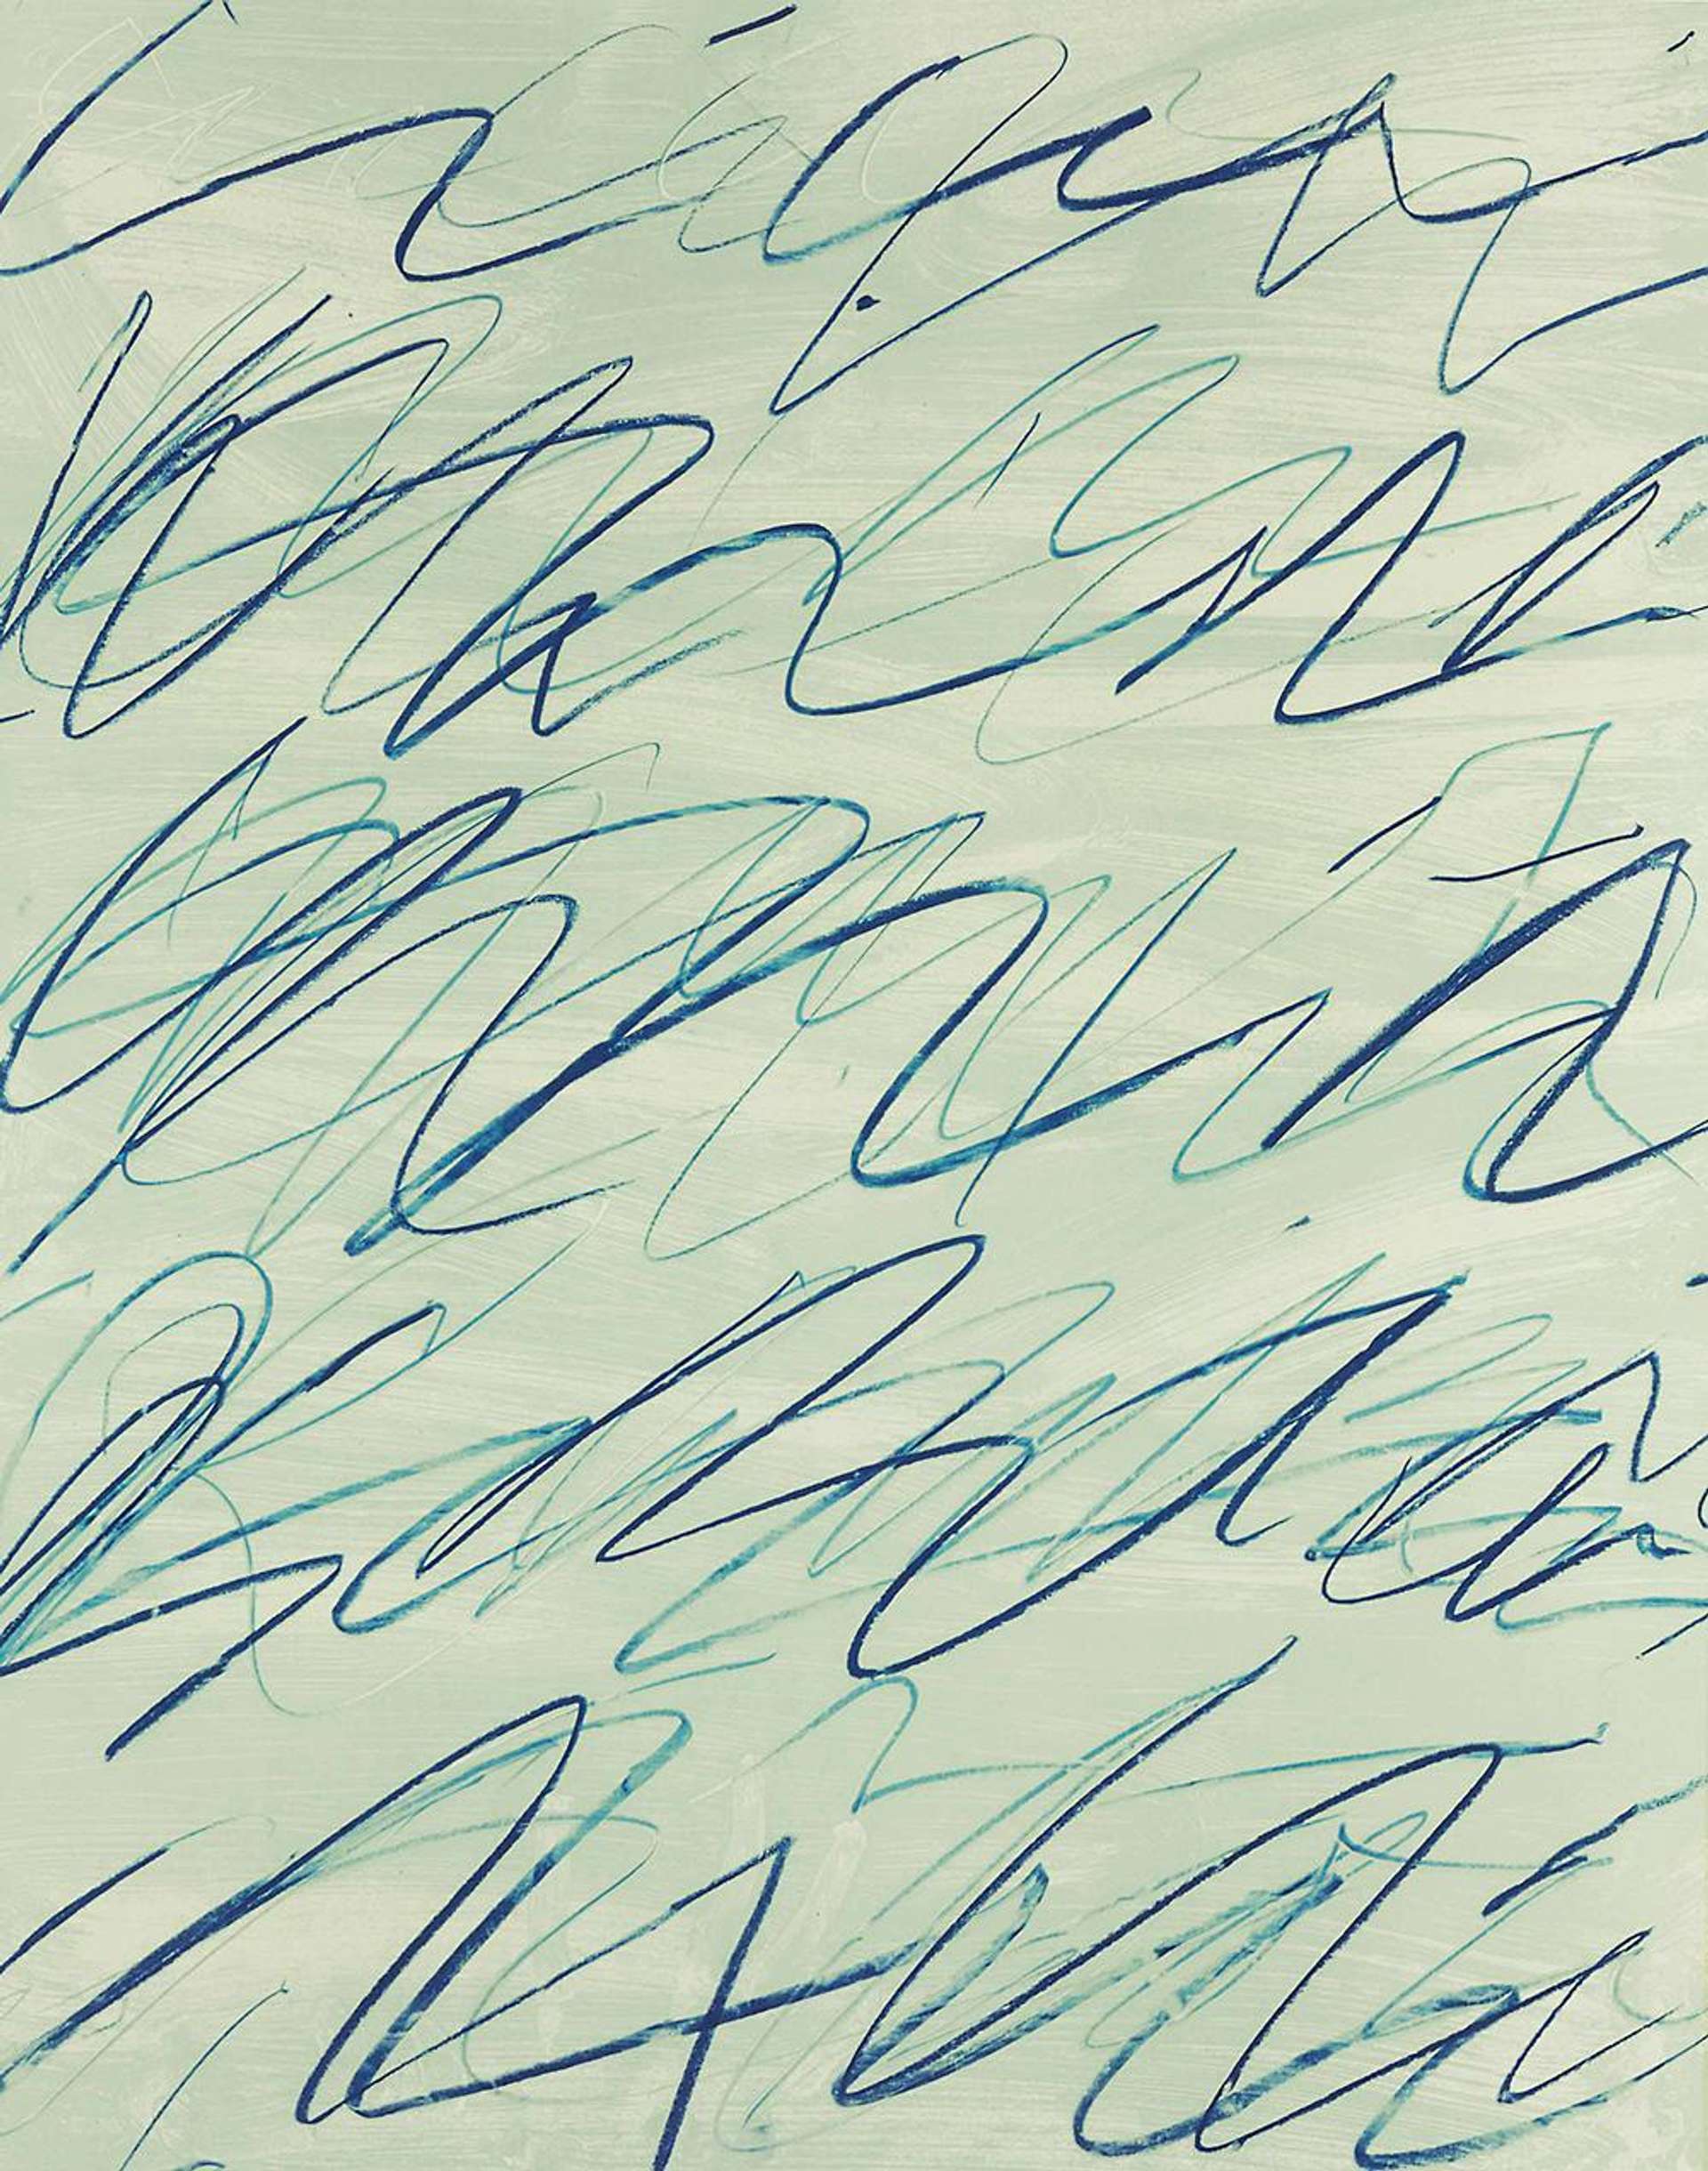 Roman Notes IV - Signed Print by Cy Twombly 1970 - MyArtBroker